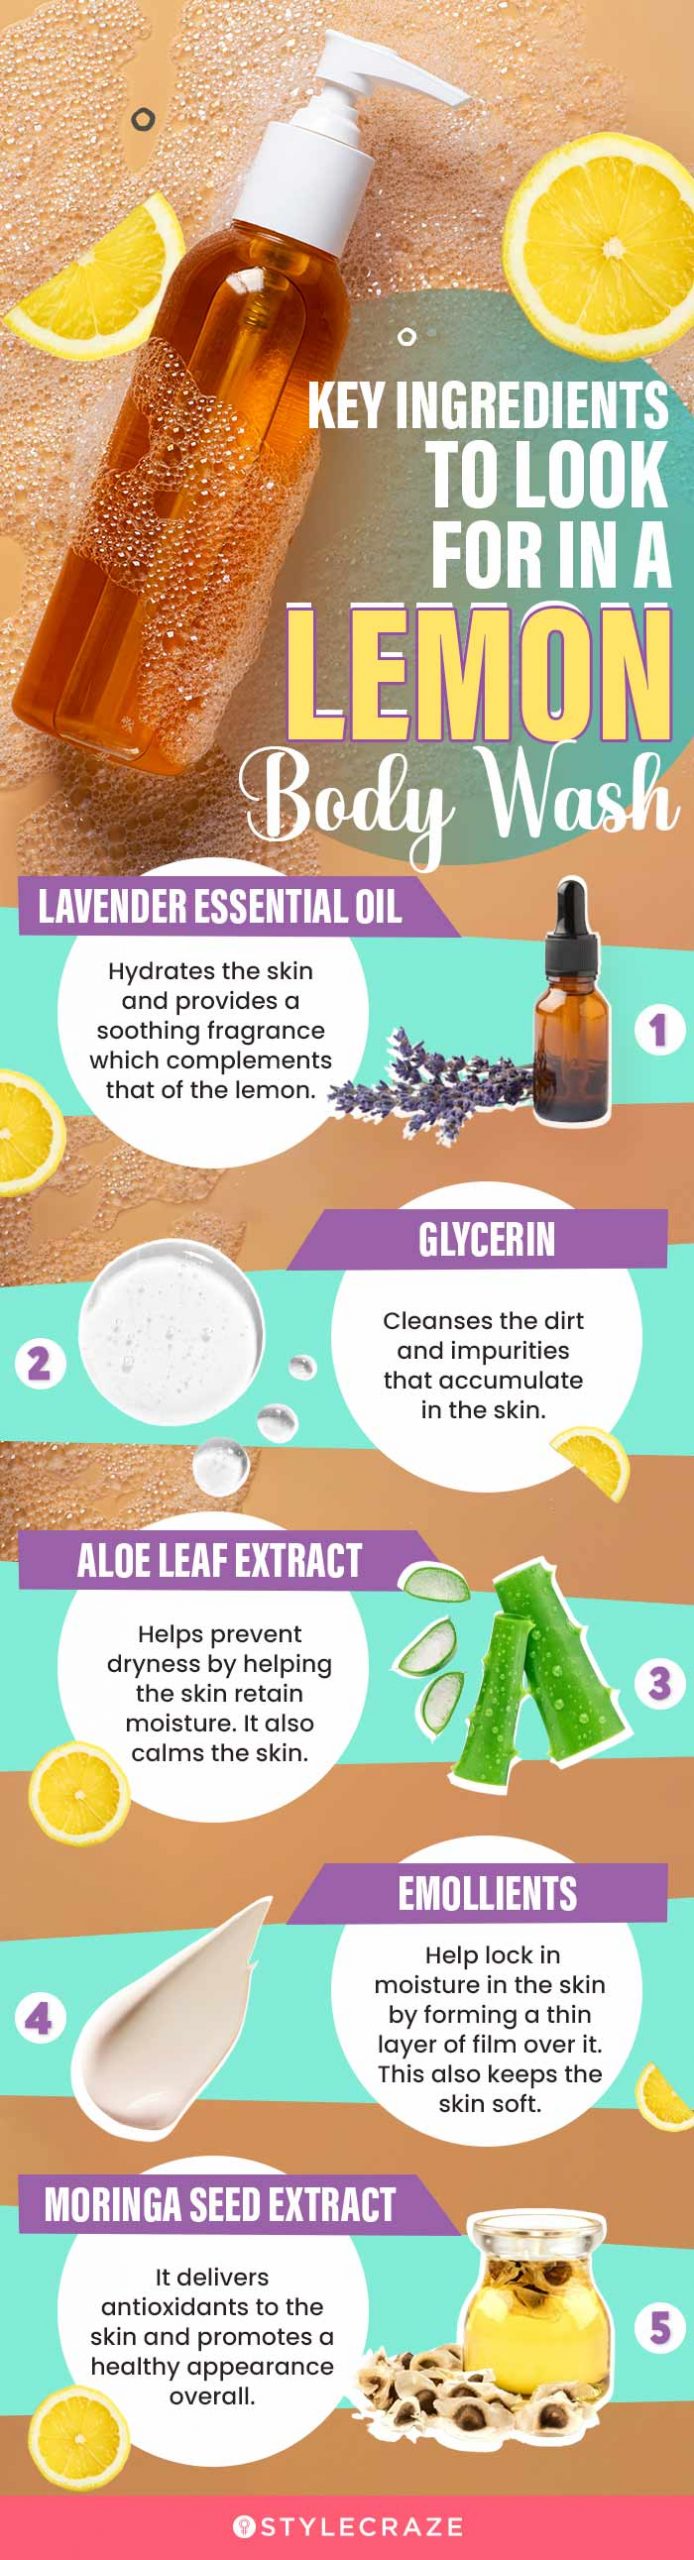 Key Ingredients To Look For In A Lemon Body Wash (infographic)